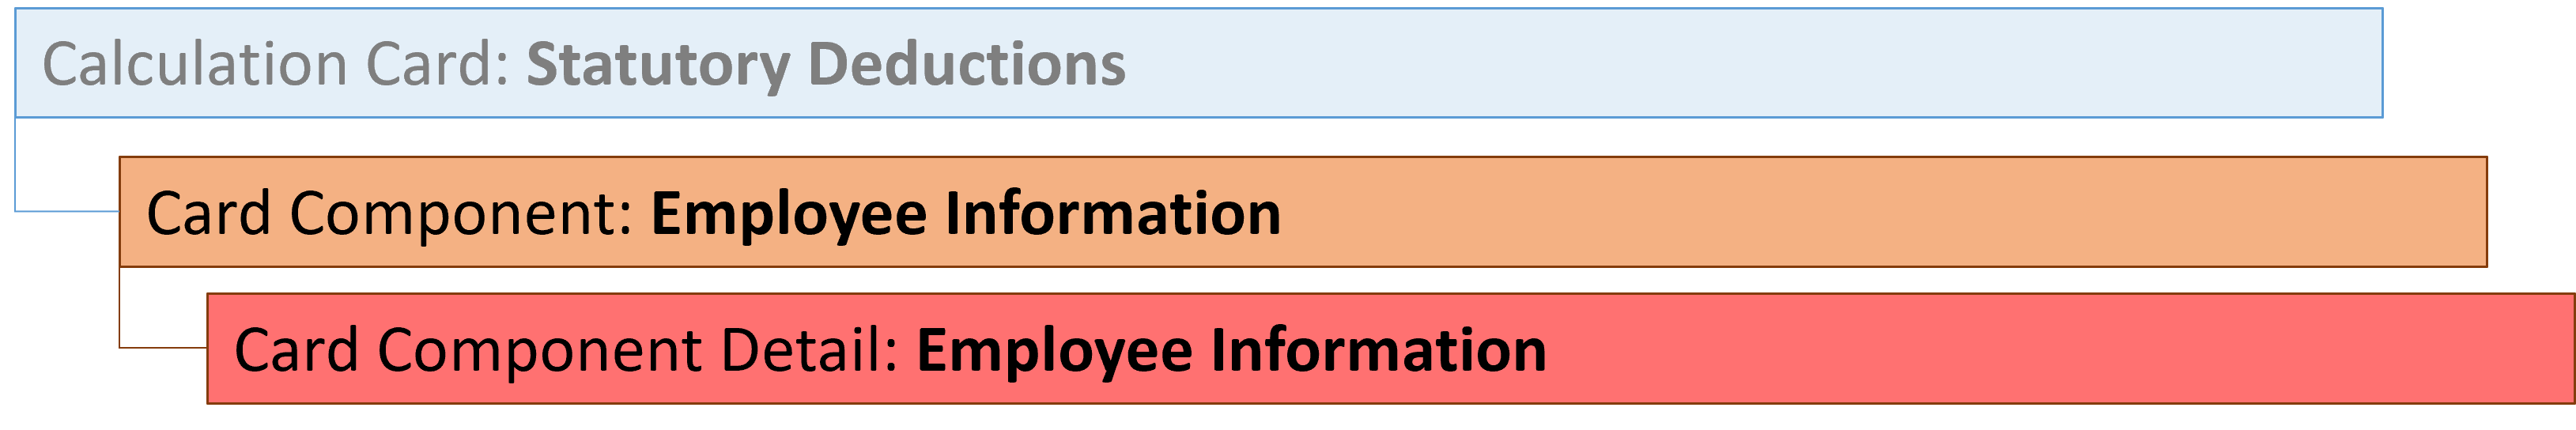 french statutory deductions employee information component